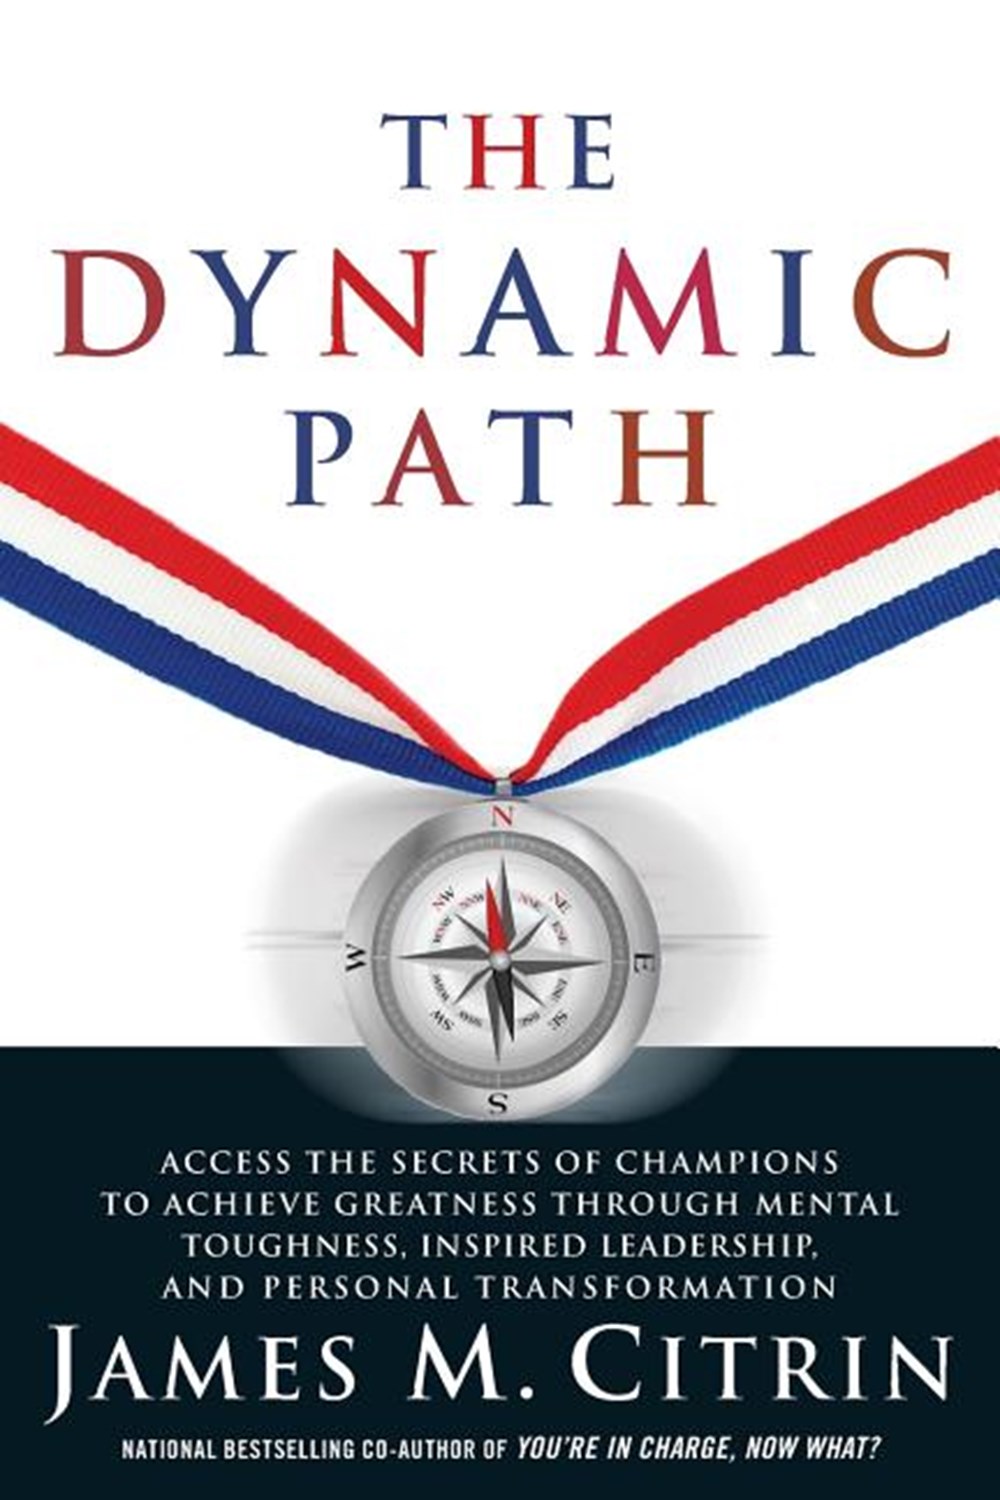 Dynamic Path: Access the Secrets of Champions to Achieve Greatness Through Mental Toughness, Inspire